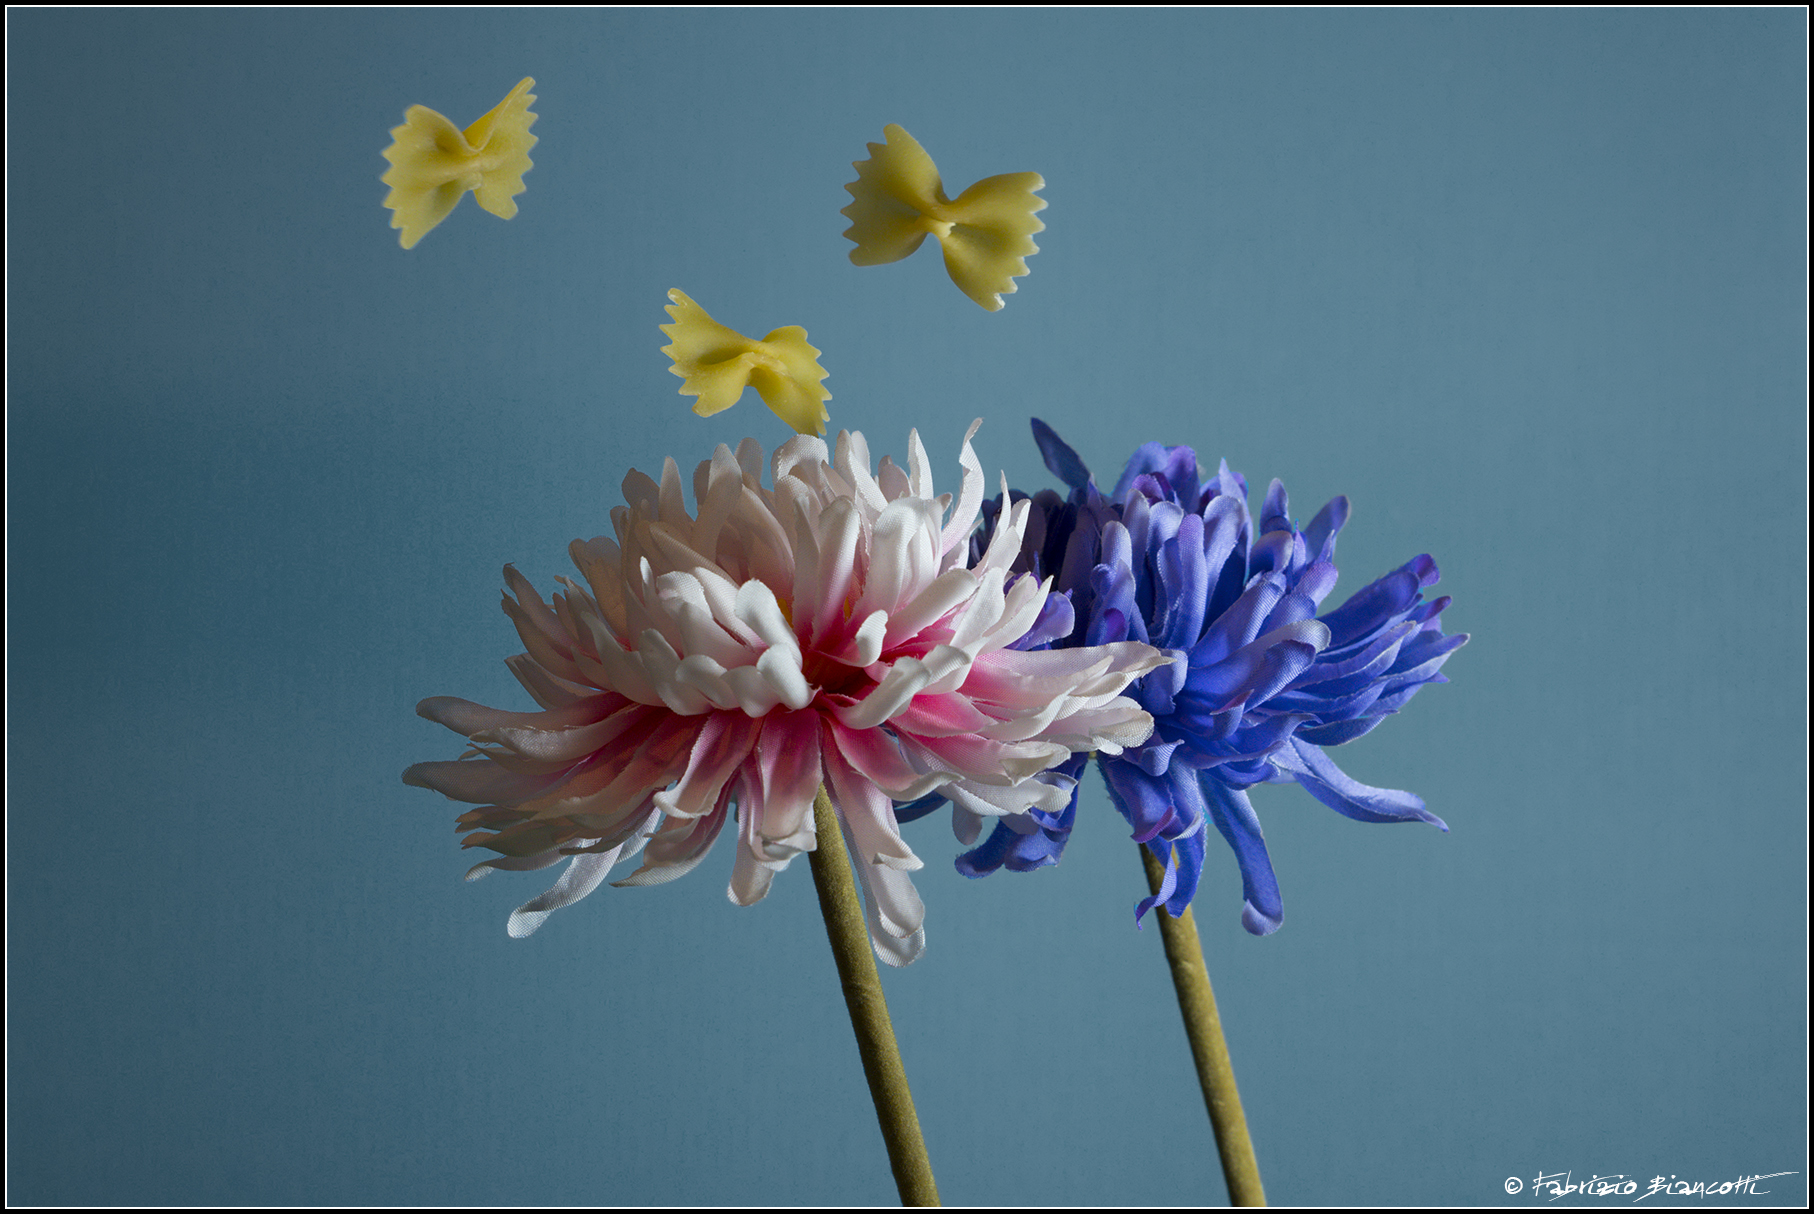 Butterflies and Flowers...